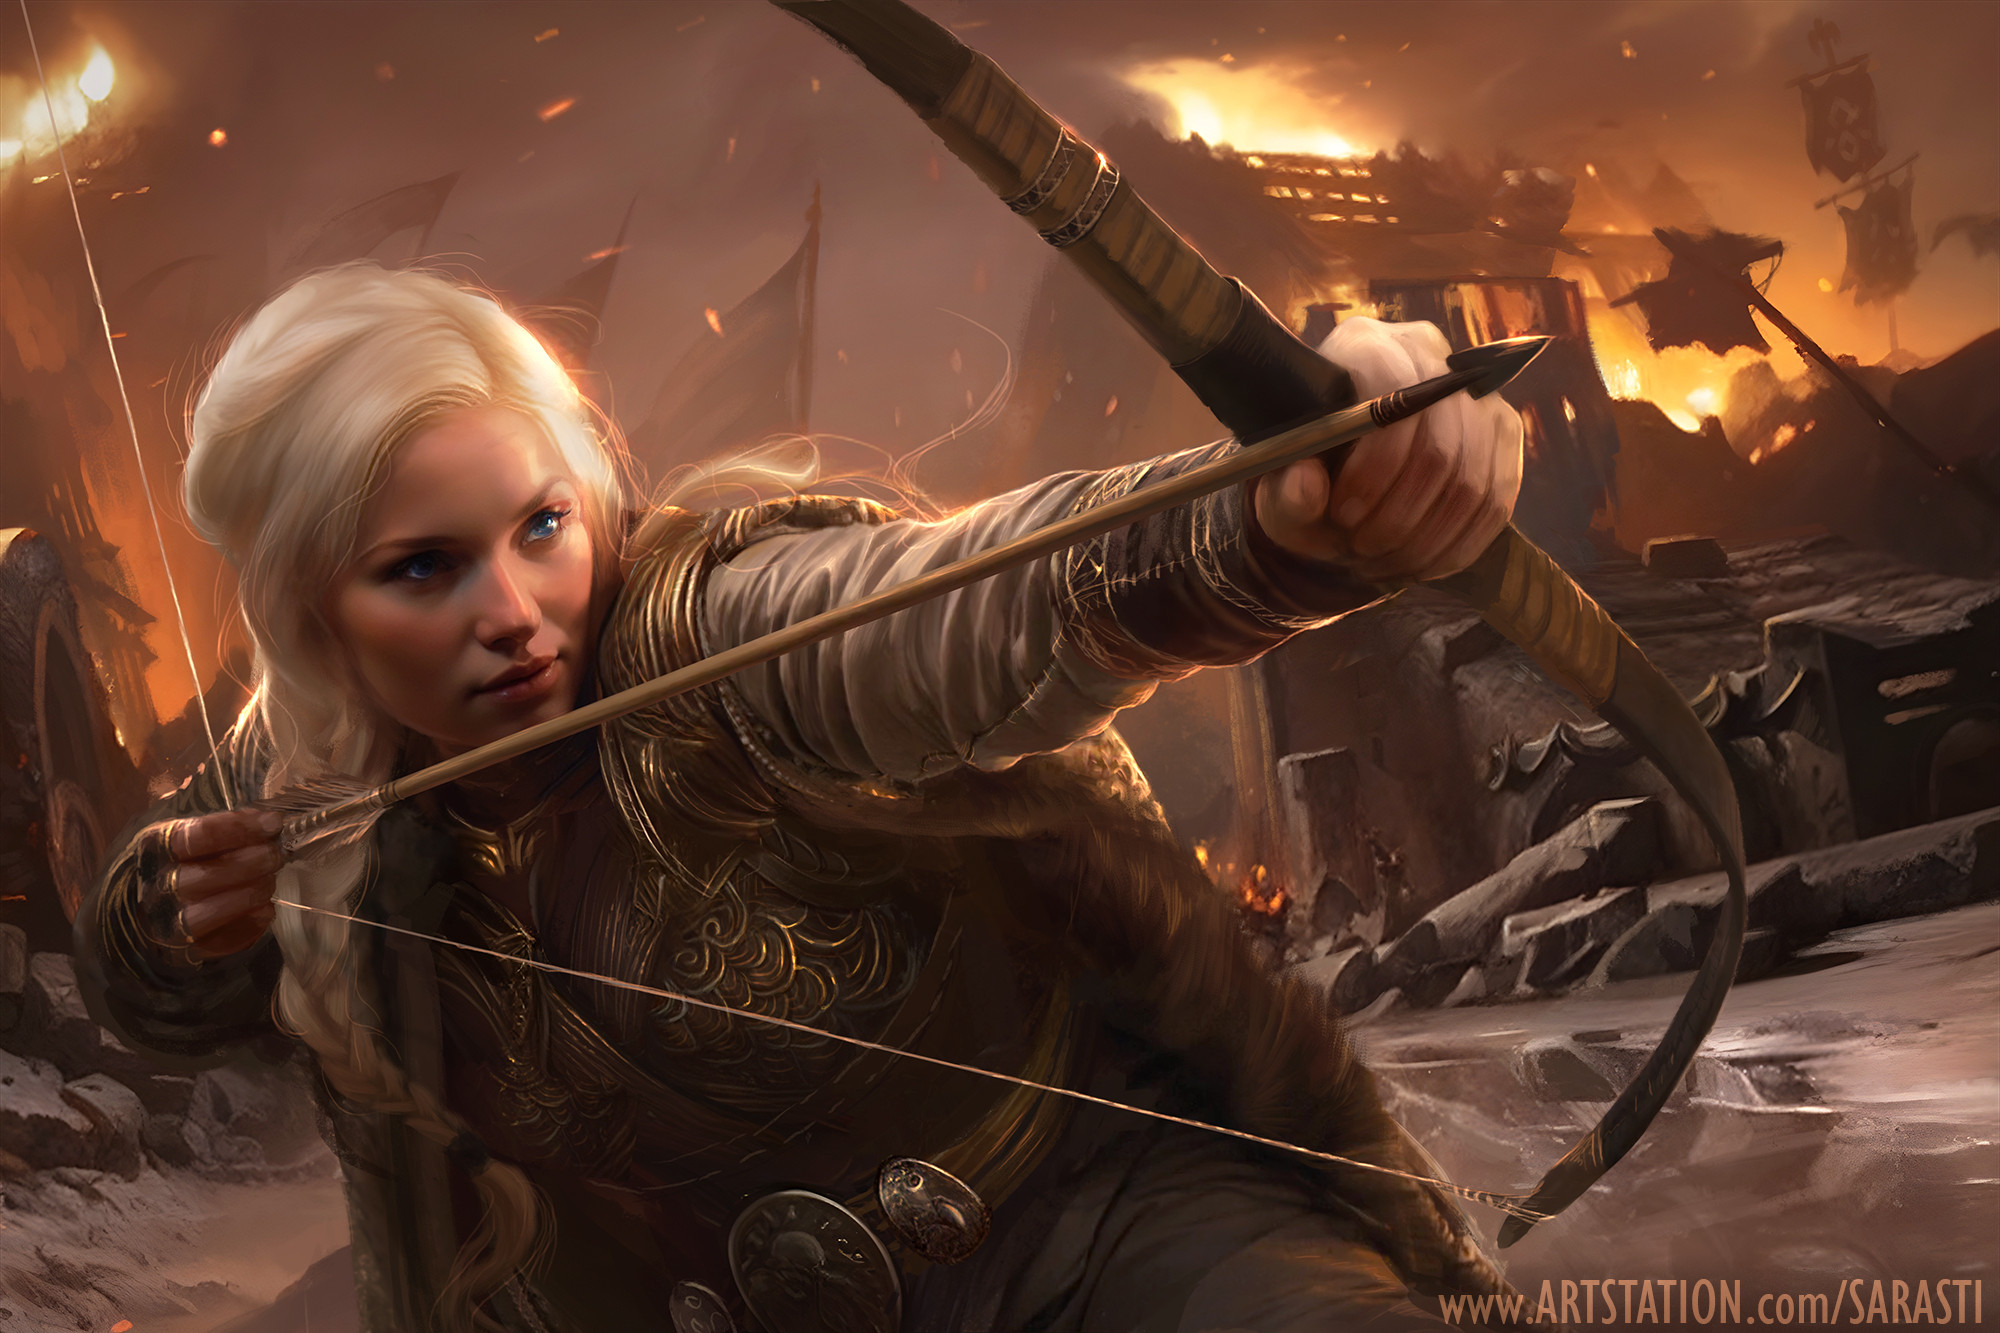 General 2000x1333 artwork women fantasy art fantasy girl archer bow and arrow watermarked aiming girls with guns blonde red lipstick blue eyes armor fantasy armor long hair